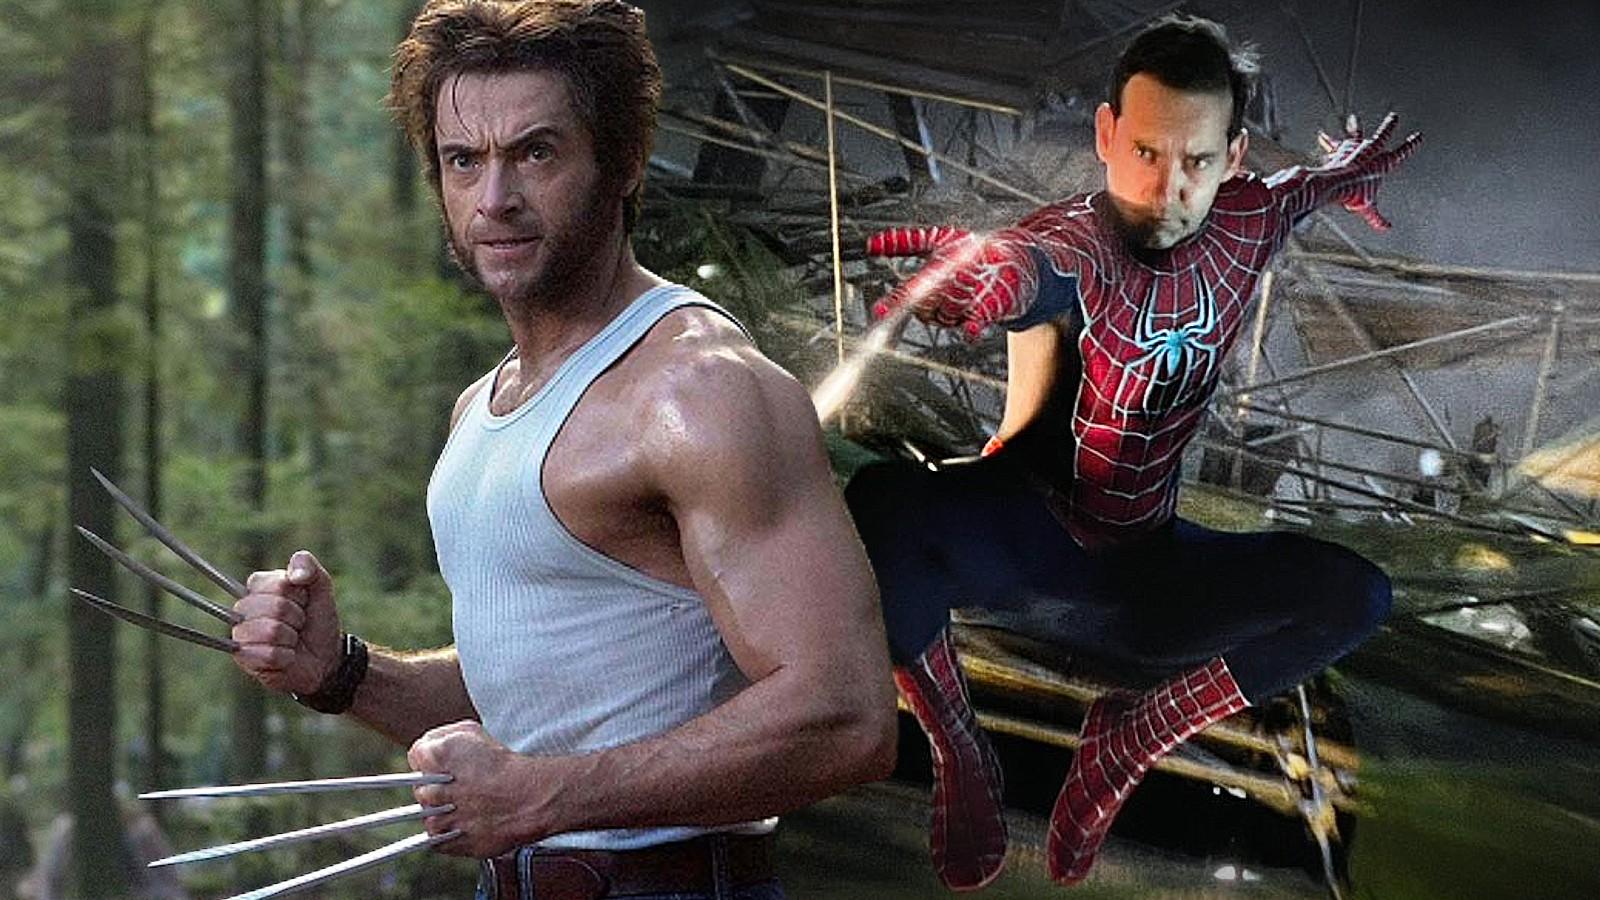 Avengers: Secret Wars To Feature Tobey Maguire's Spider-Man Fighting  Alongside Hugh Jackman's Wolverine, Plot Details Of The Kang Dynasty Out  Too – Reports